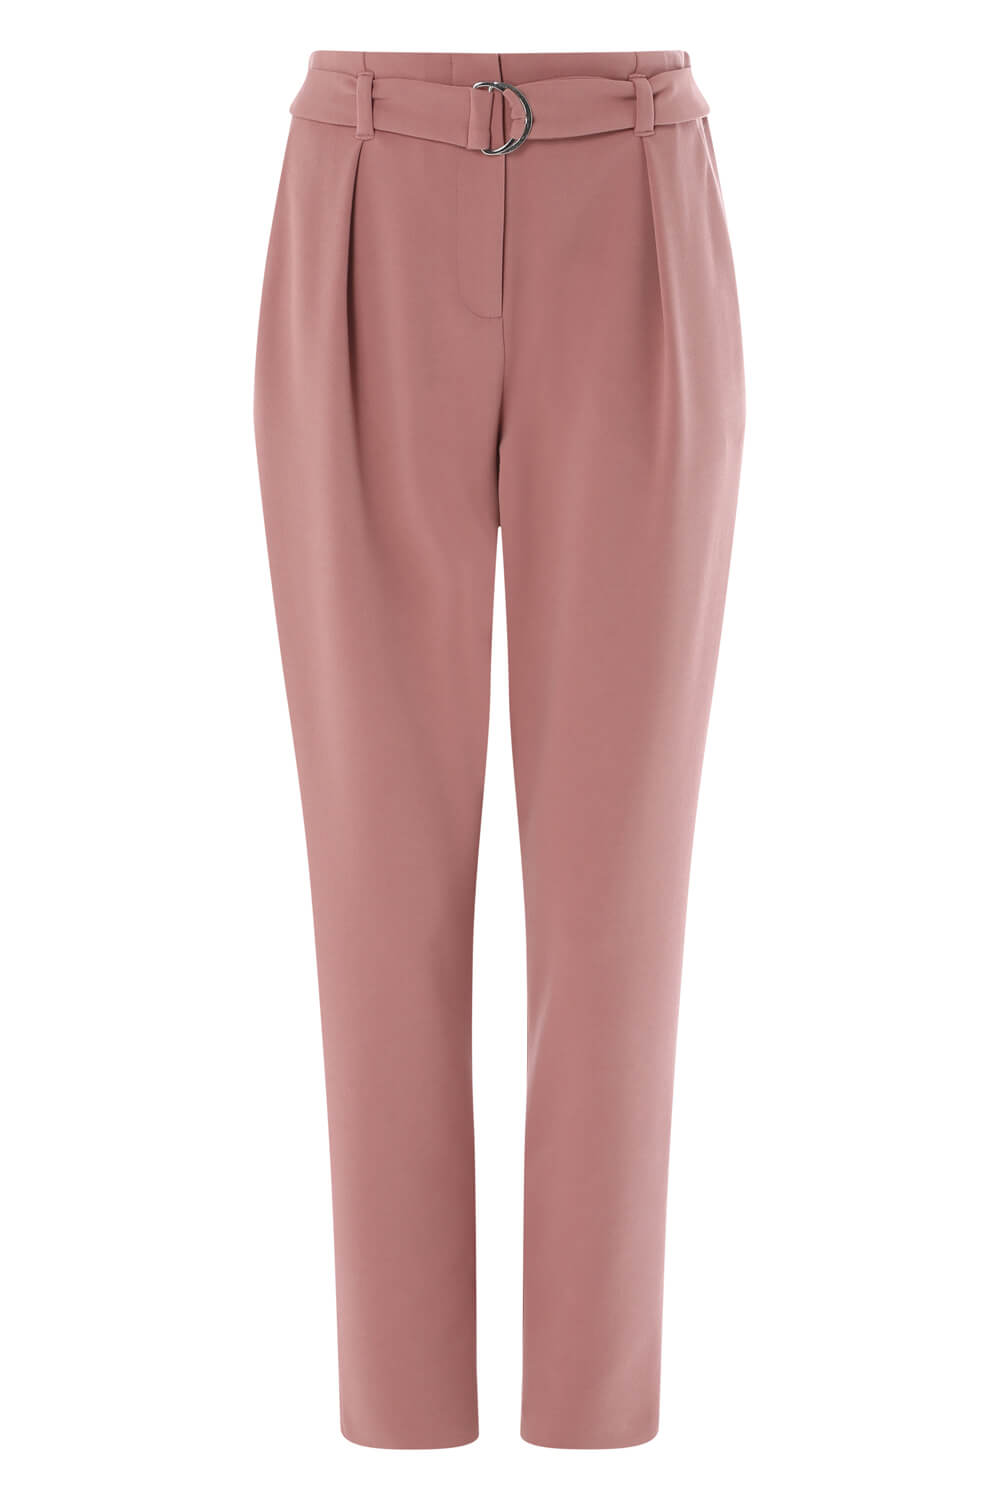 Belted Tailored Trousers in PINK - Roman Originals UK